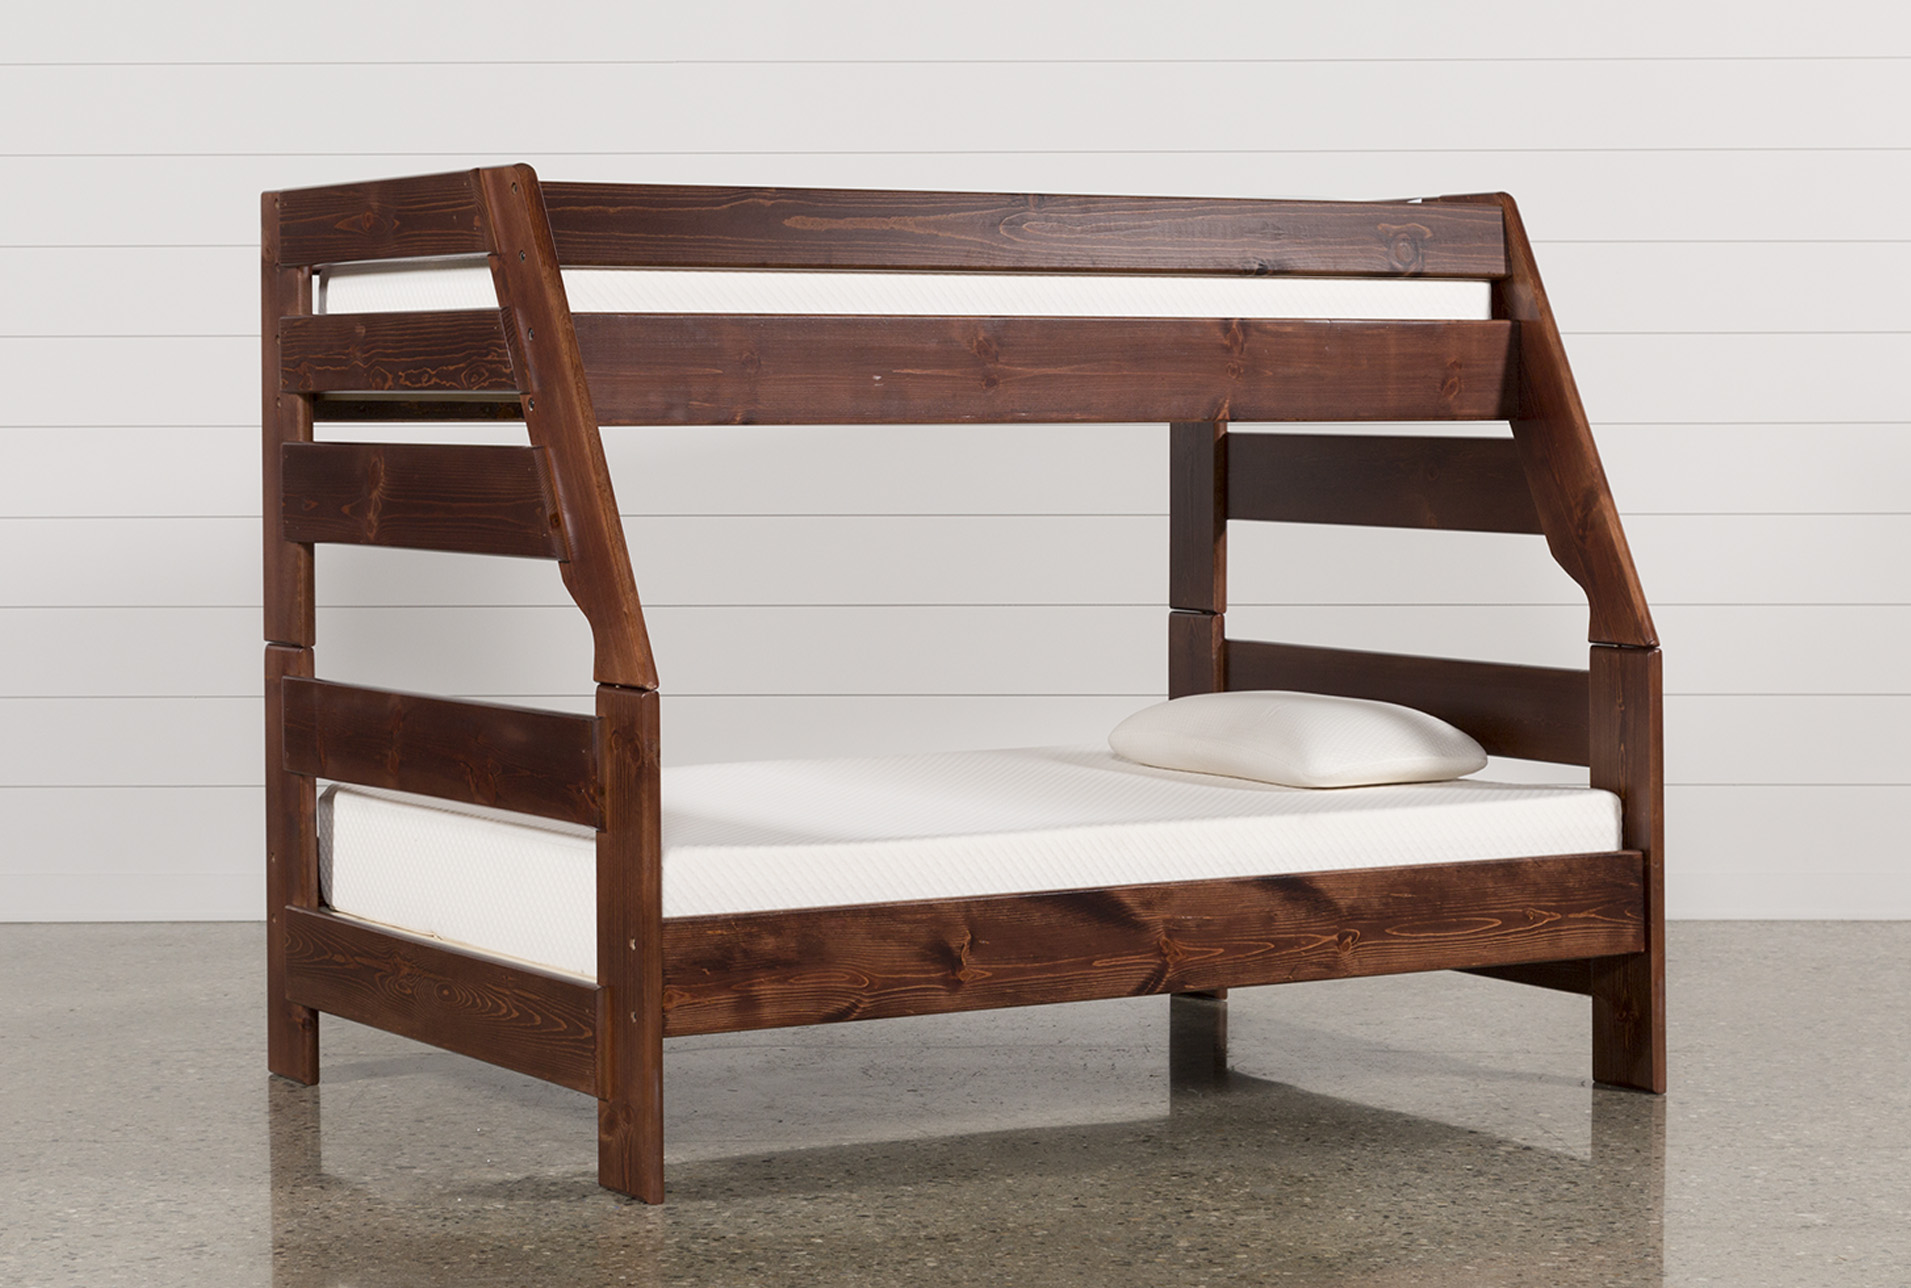 wooden bunk bed full and twin